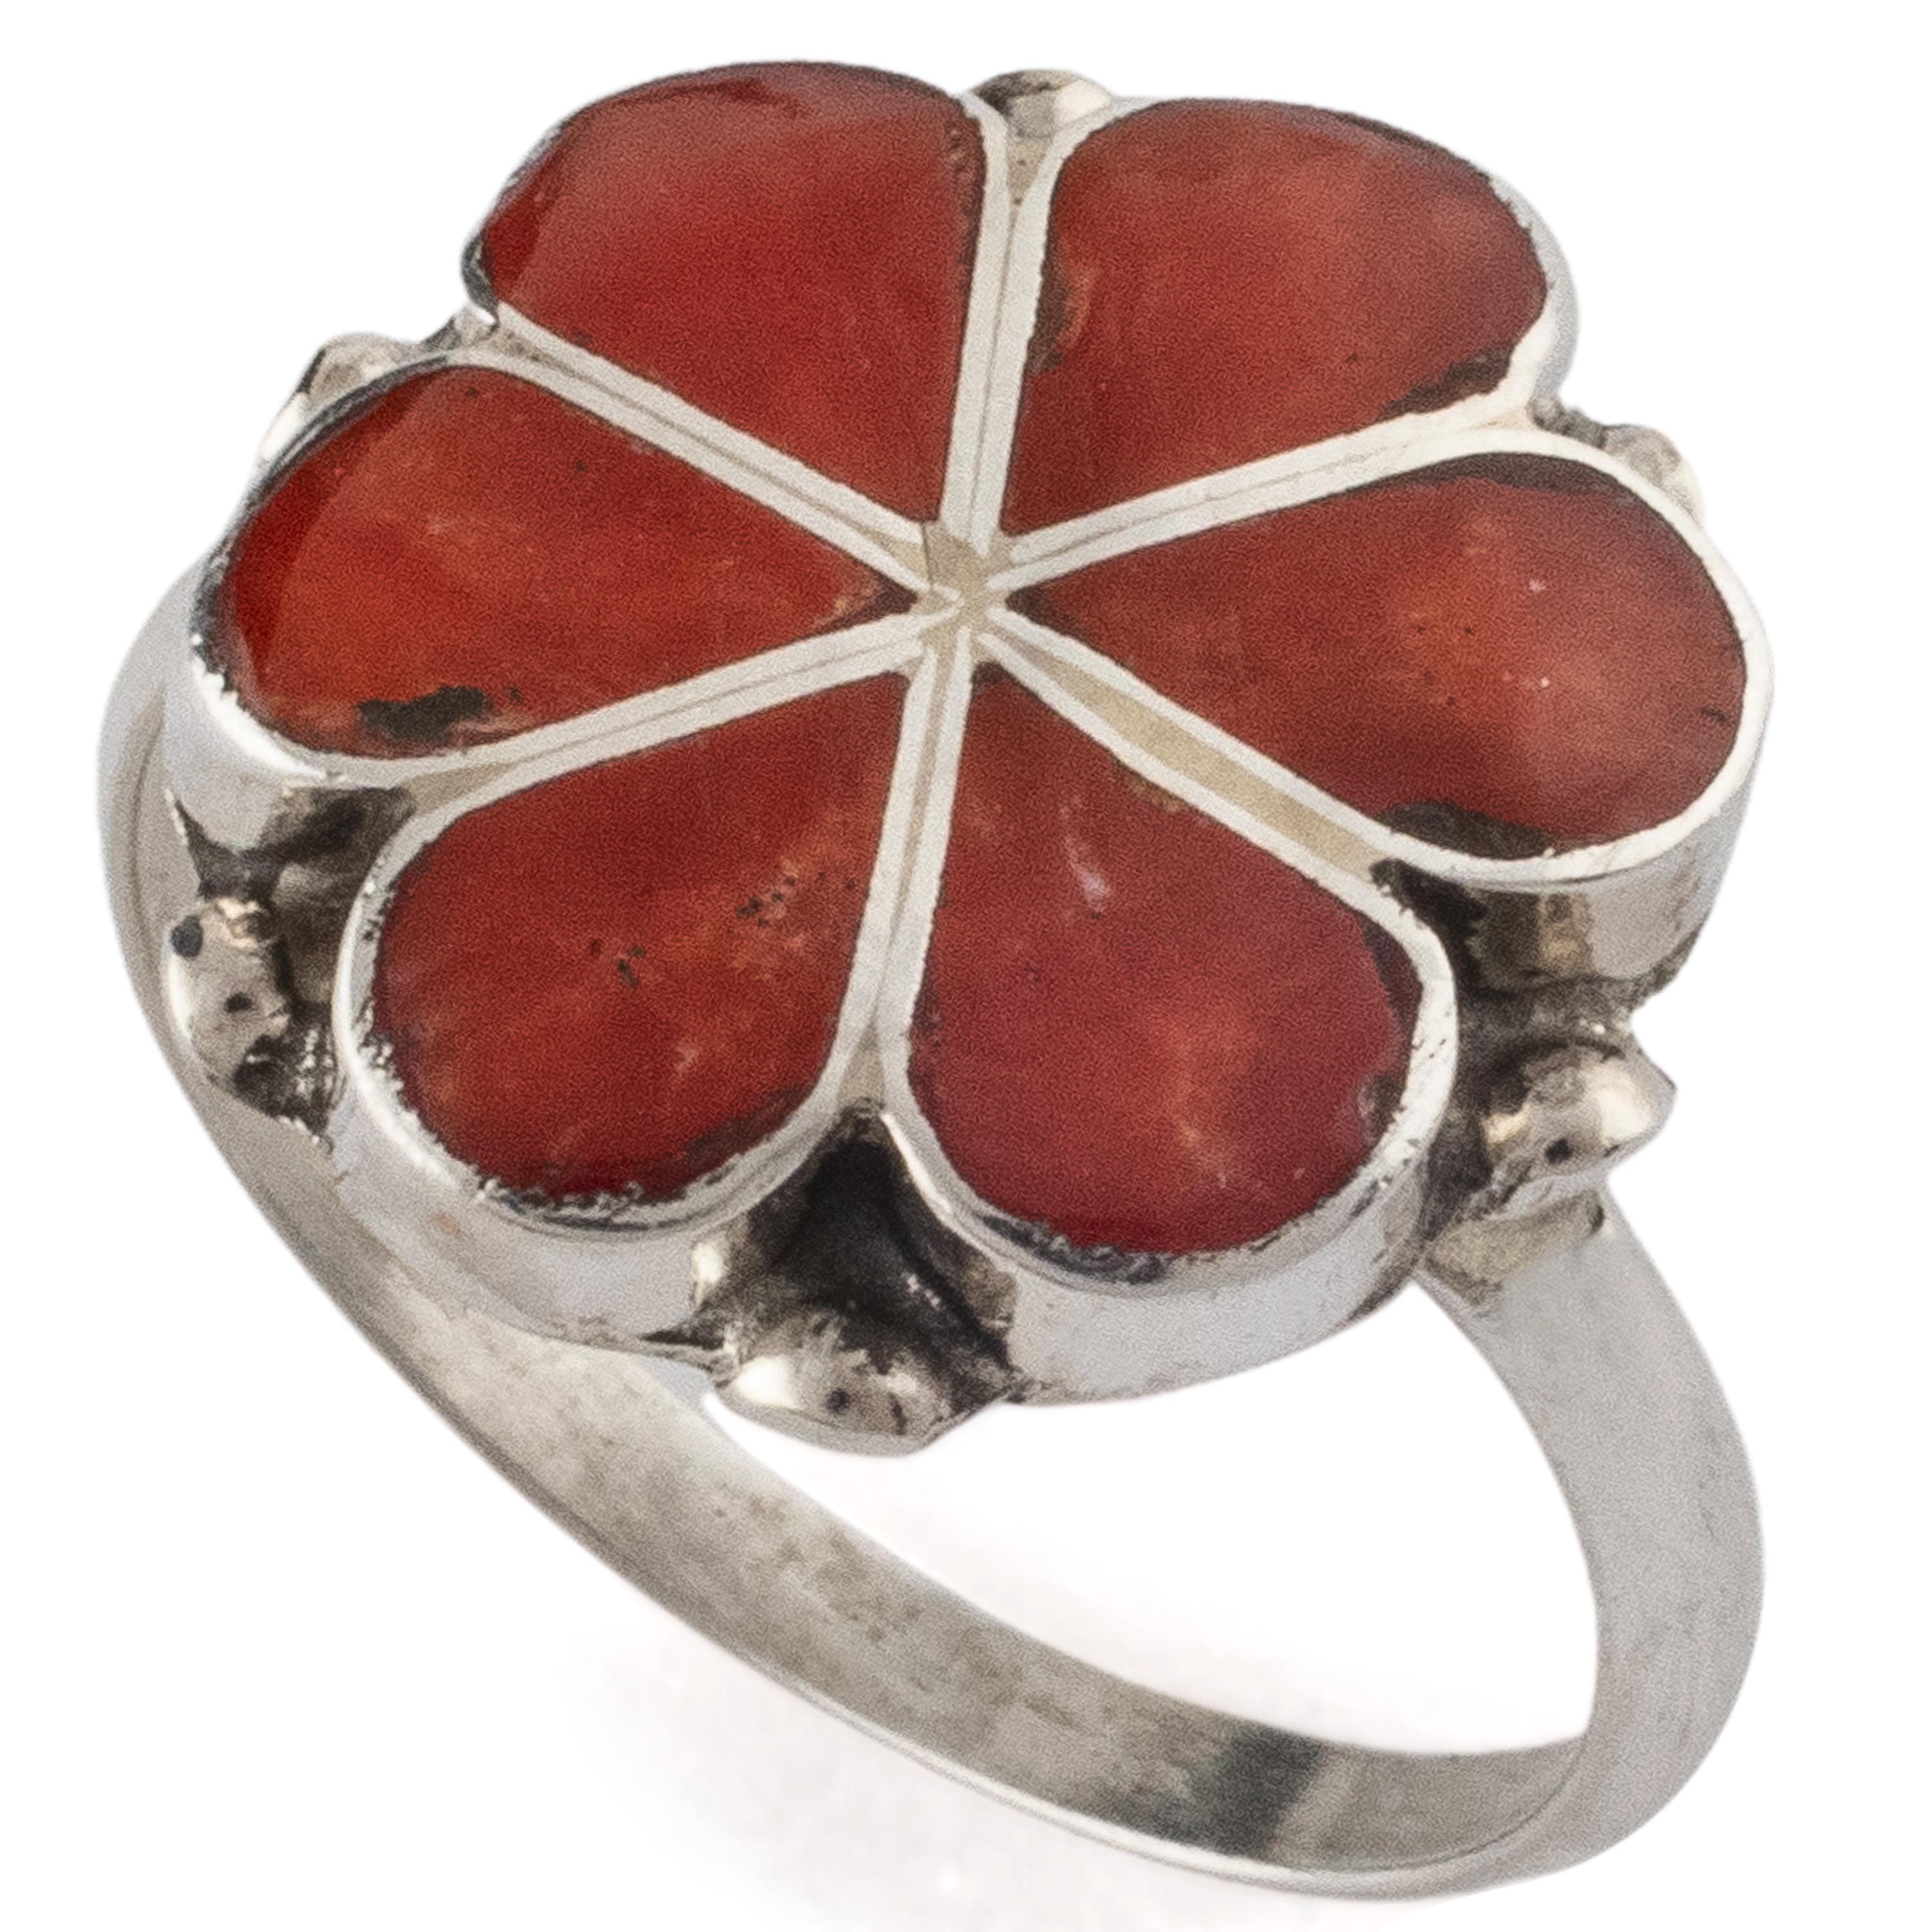 Kalifano Native American Jewelry 6.5 Bernadette Hattie Zuni Coral Flower Inlay USA Native American Made 925 Sterling Silver Ring NAR250.008.65